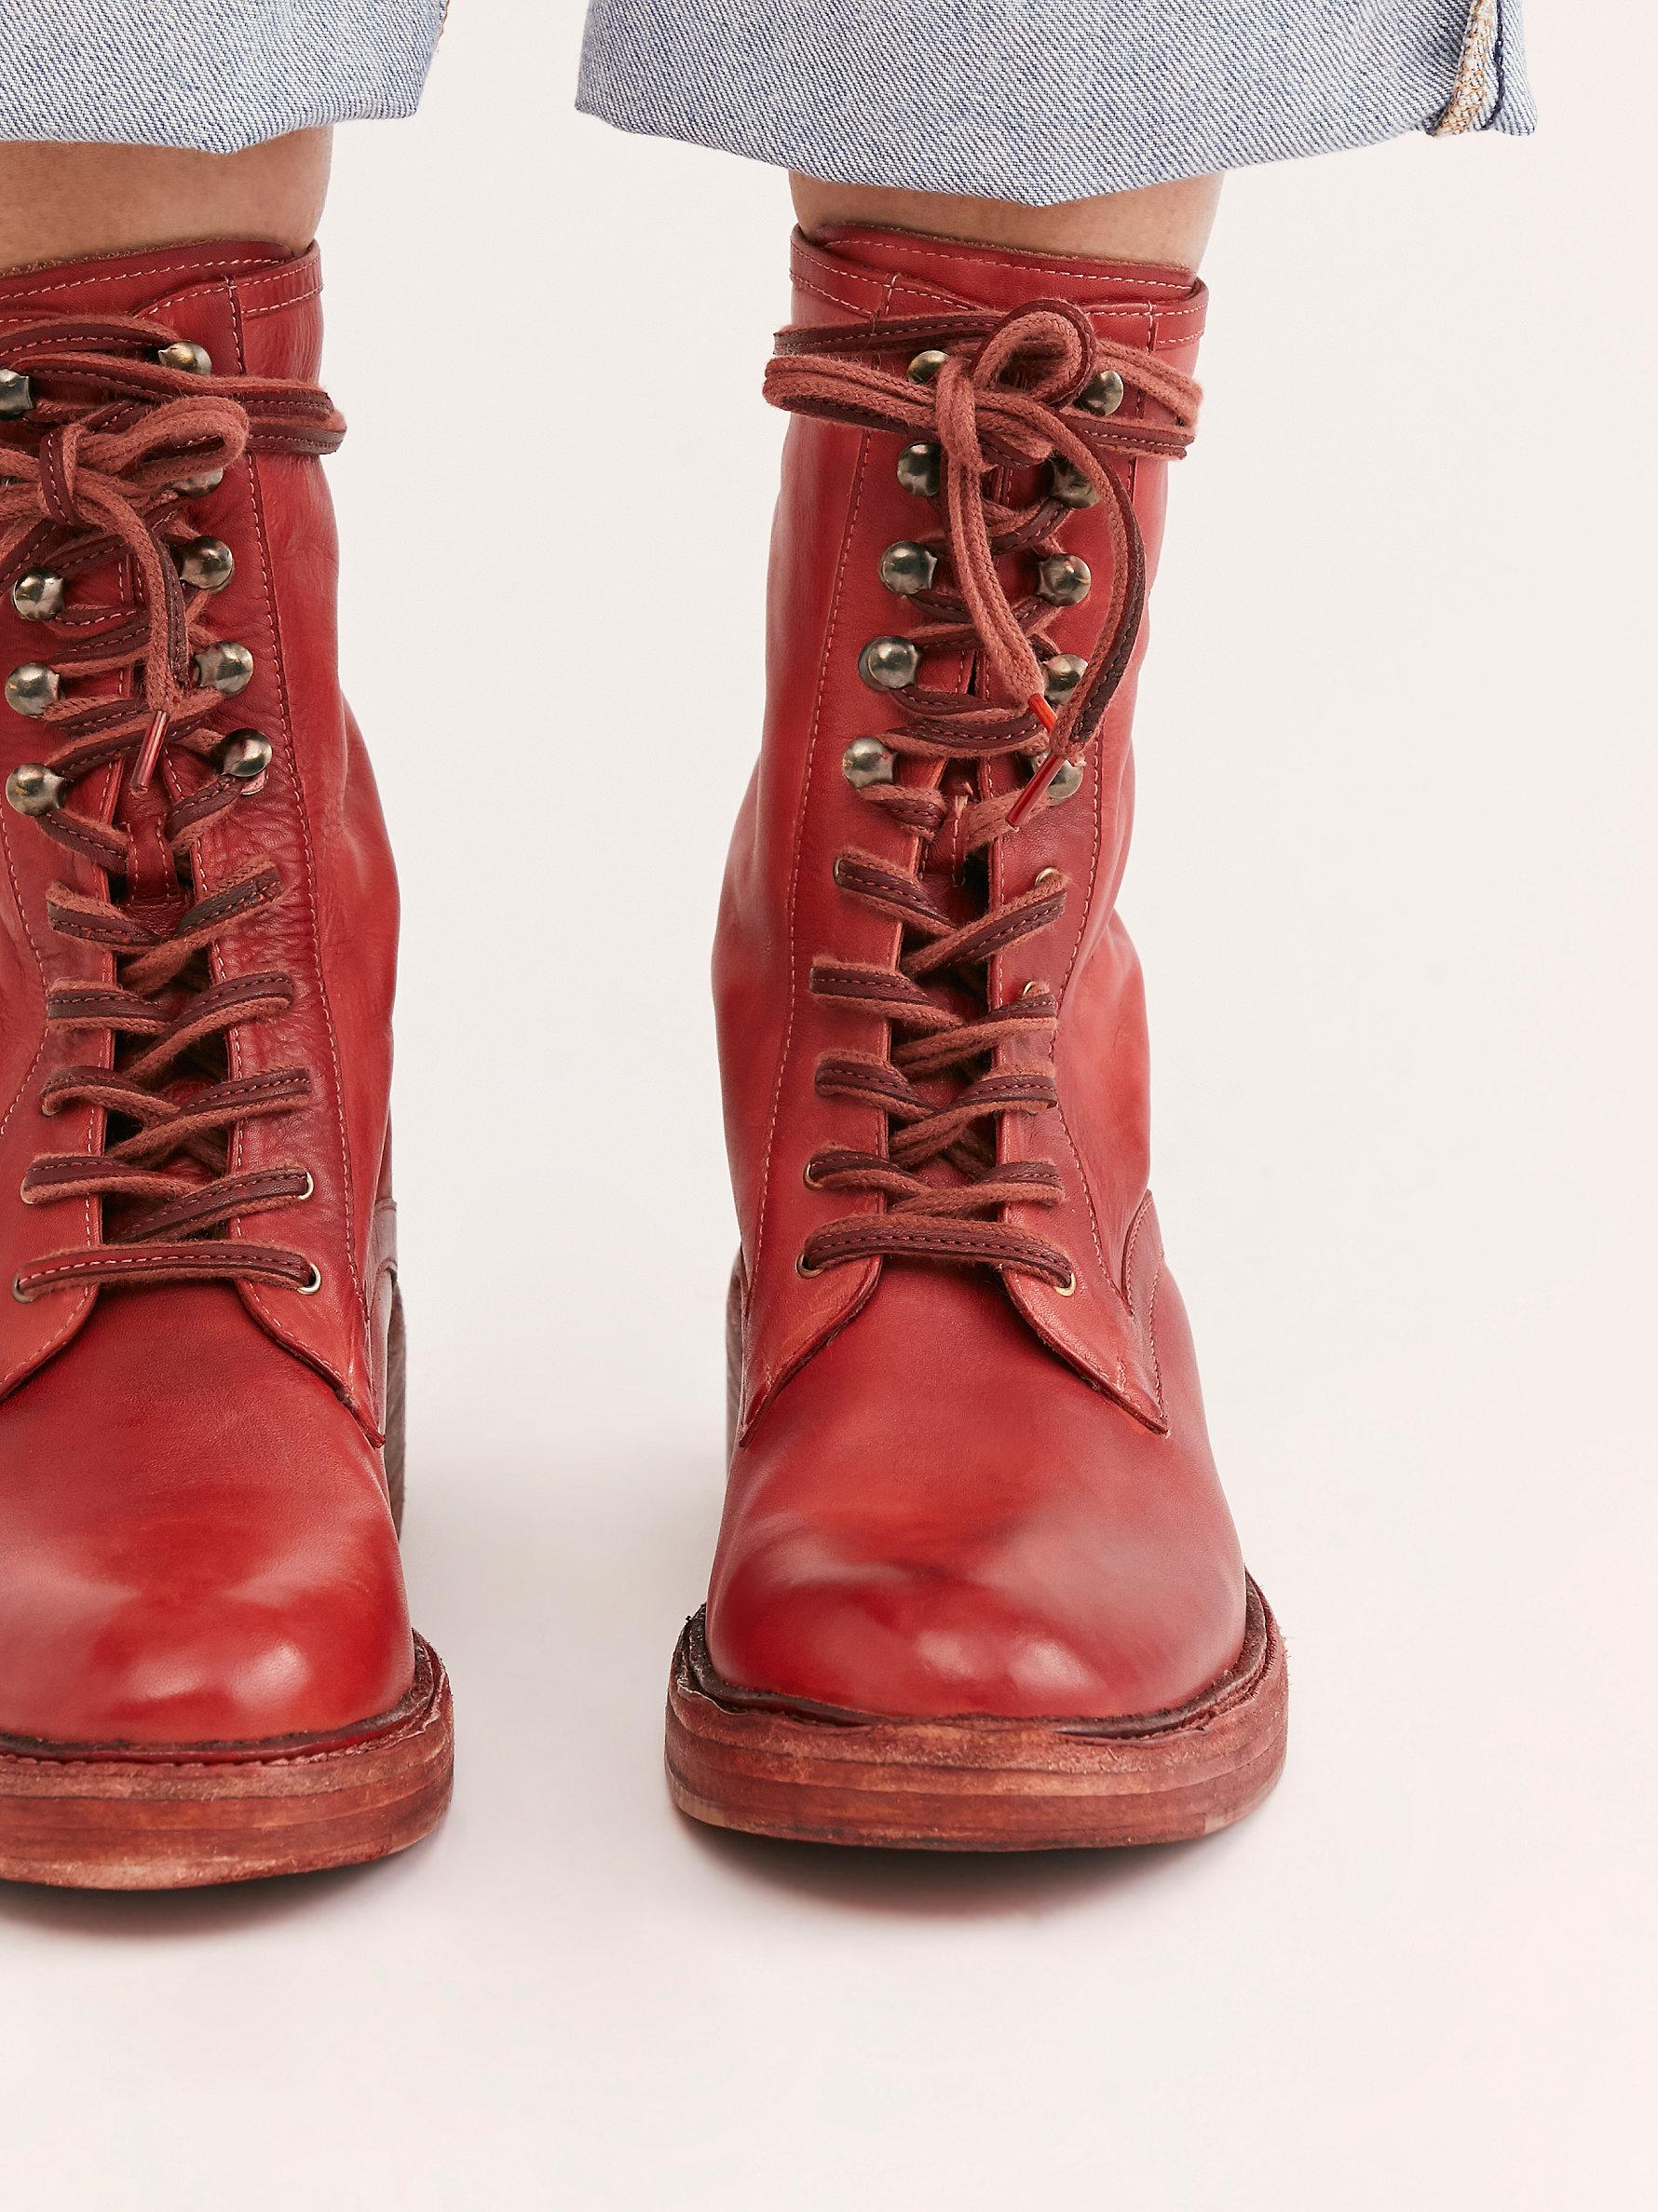 Free People Santa Fe Lace-up Boot in Red | Lyst